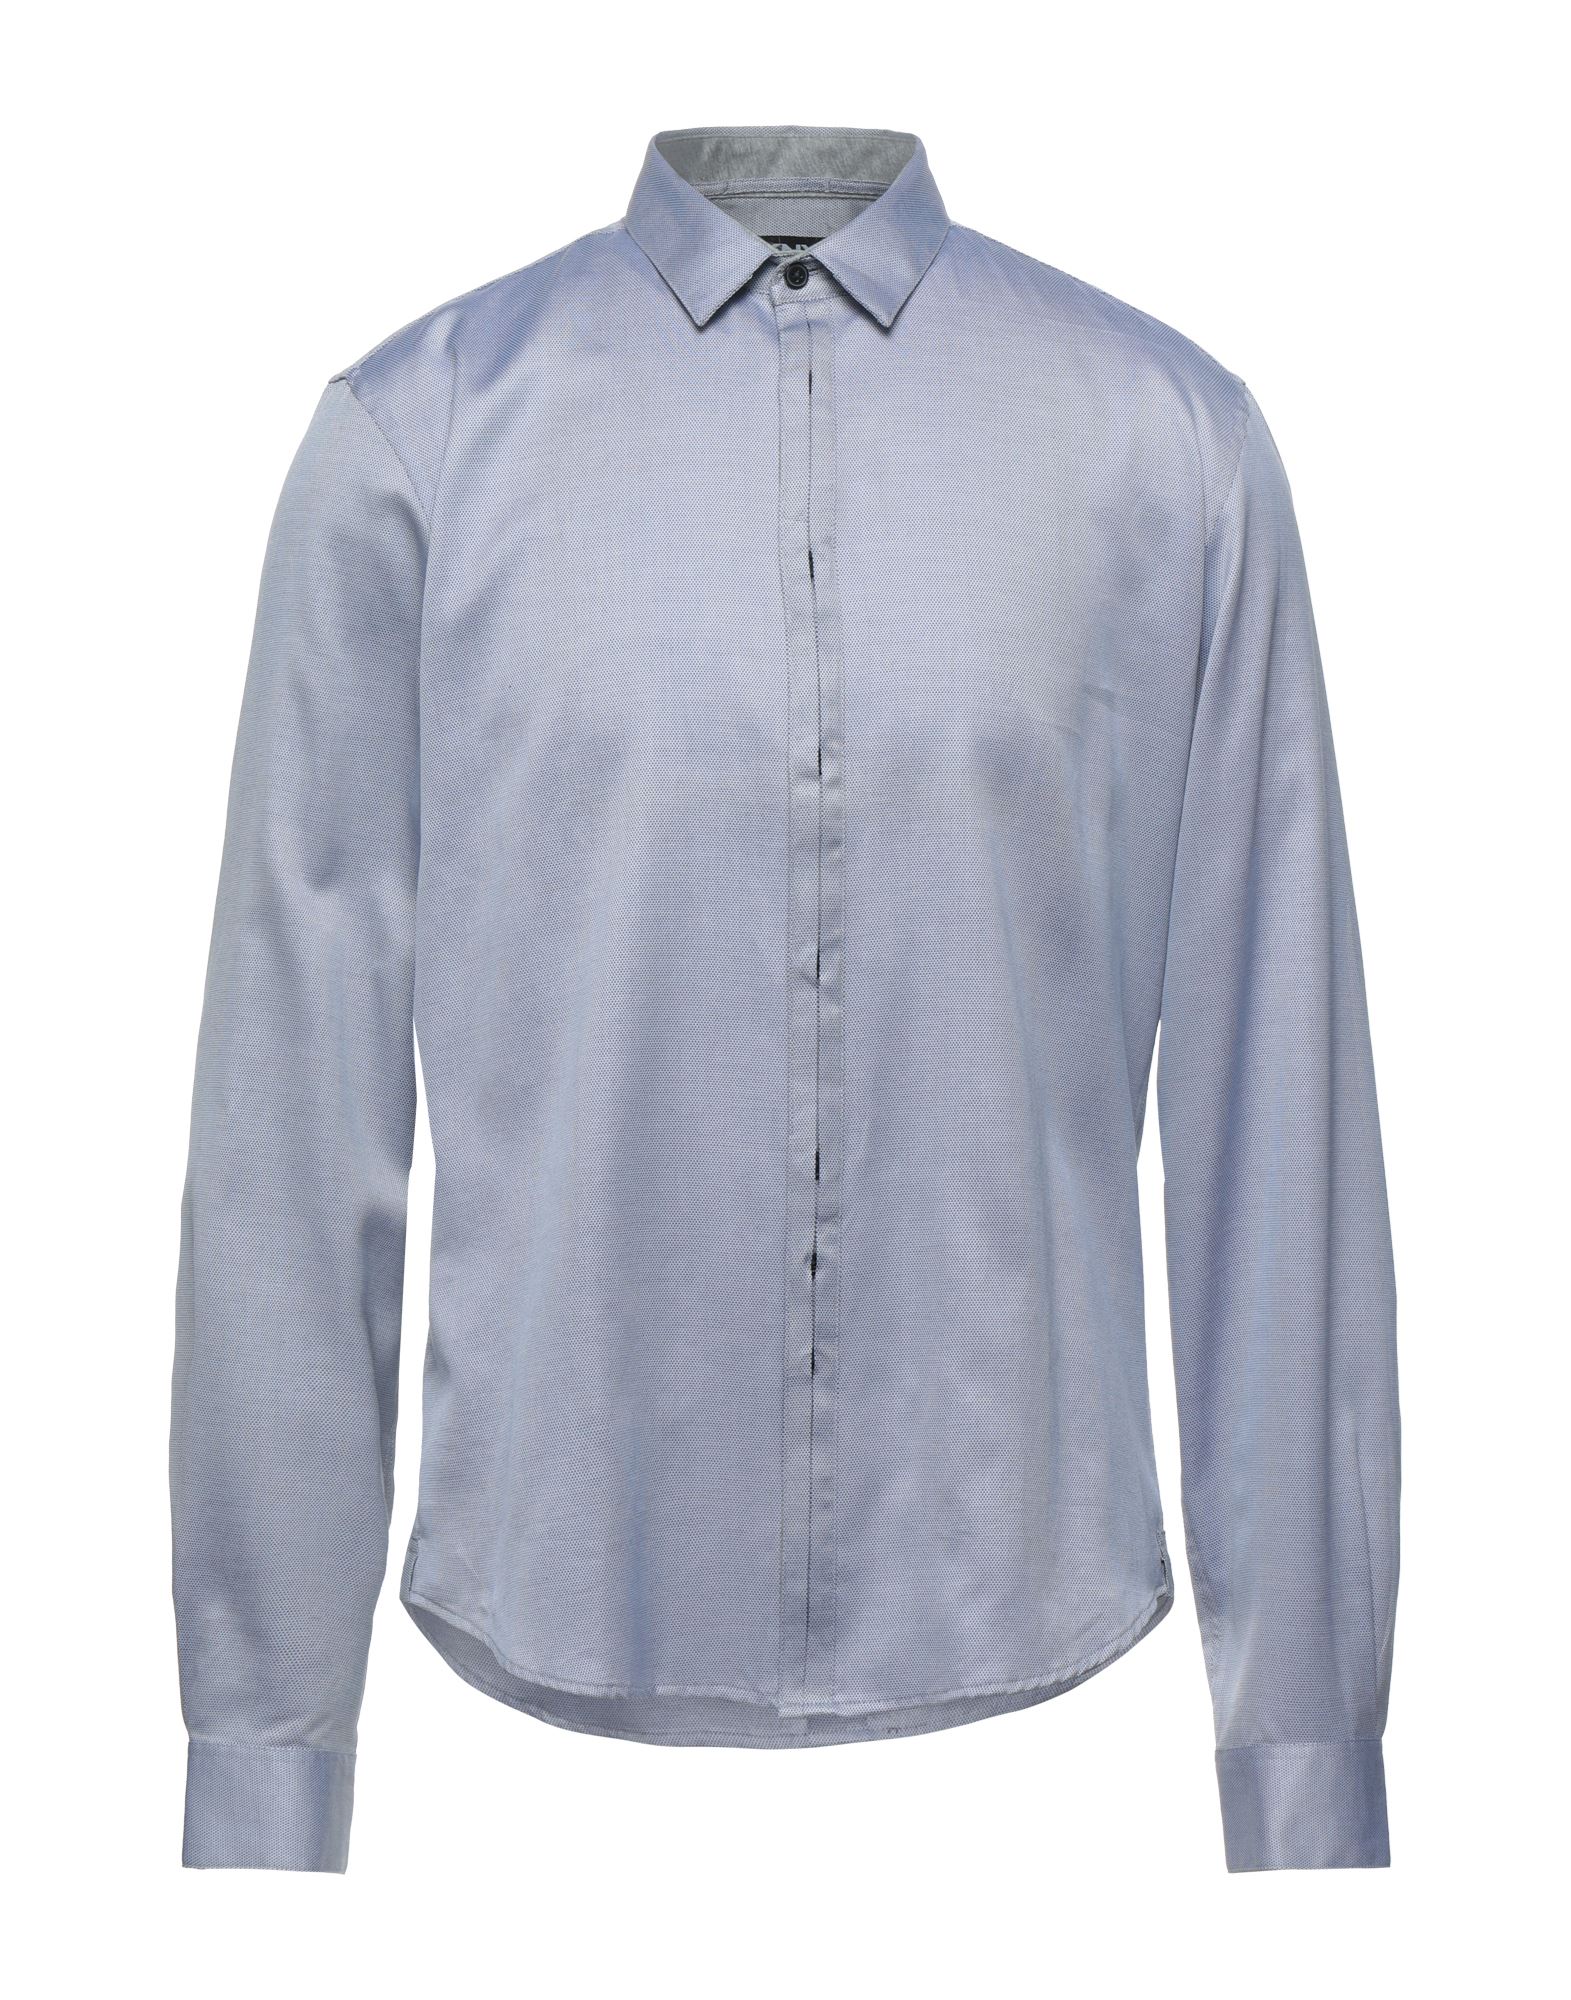 Dkny Shirts In Blue | ModeSens